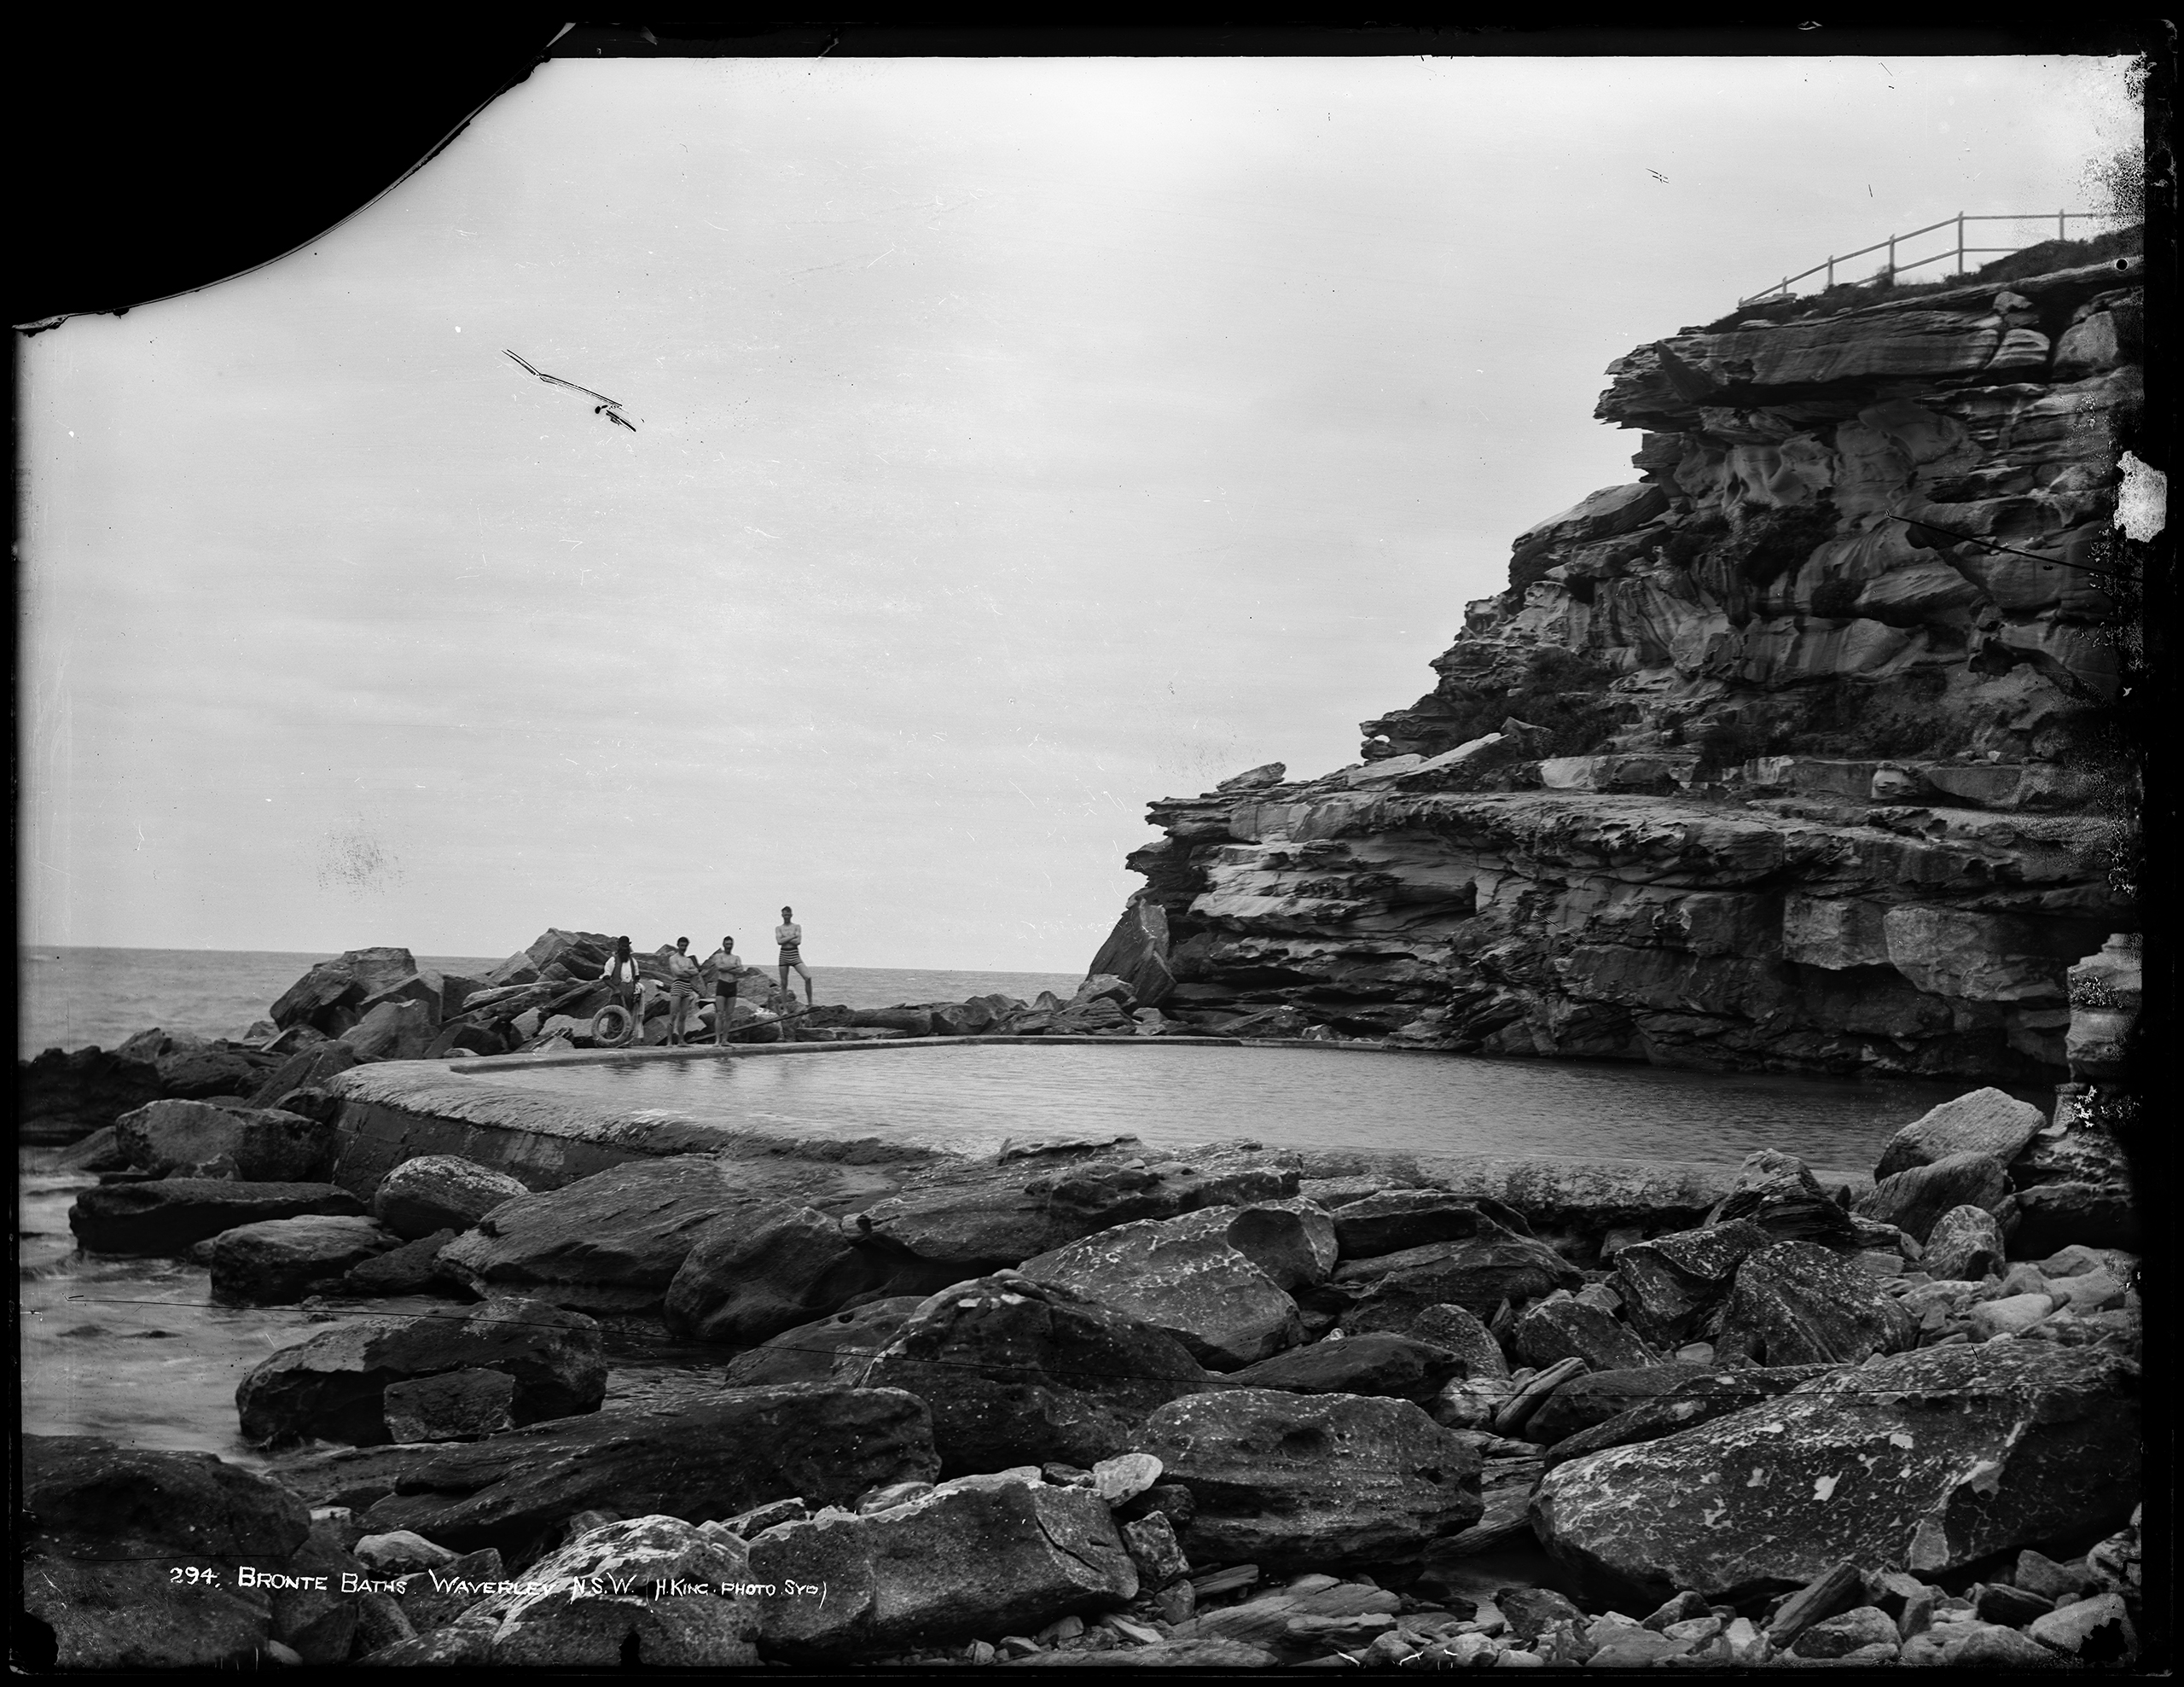 'Bronte Baths, Waverley, N.S.W.' by Henry King from the Tyrrell Collection